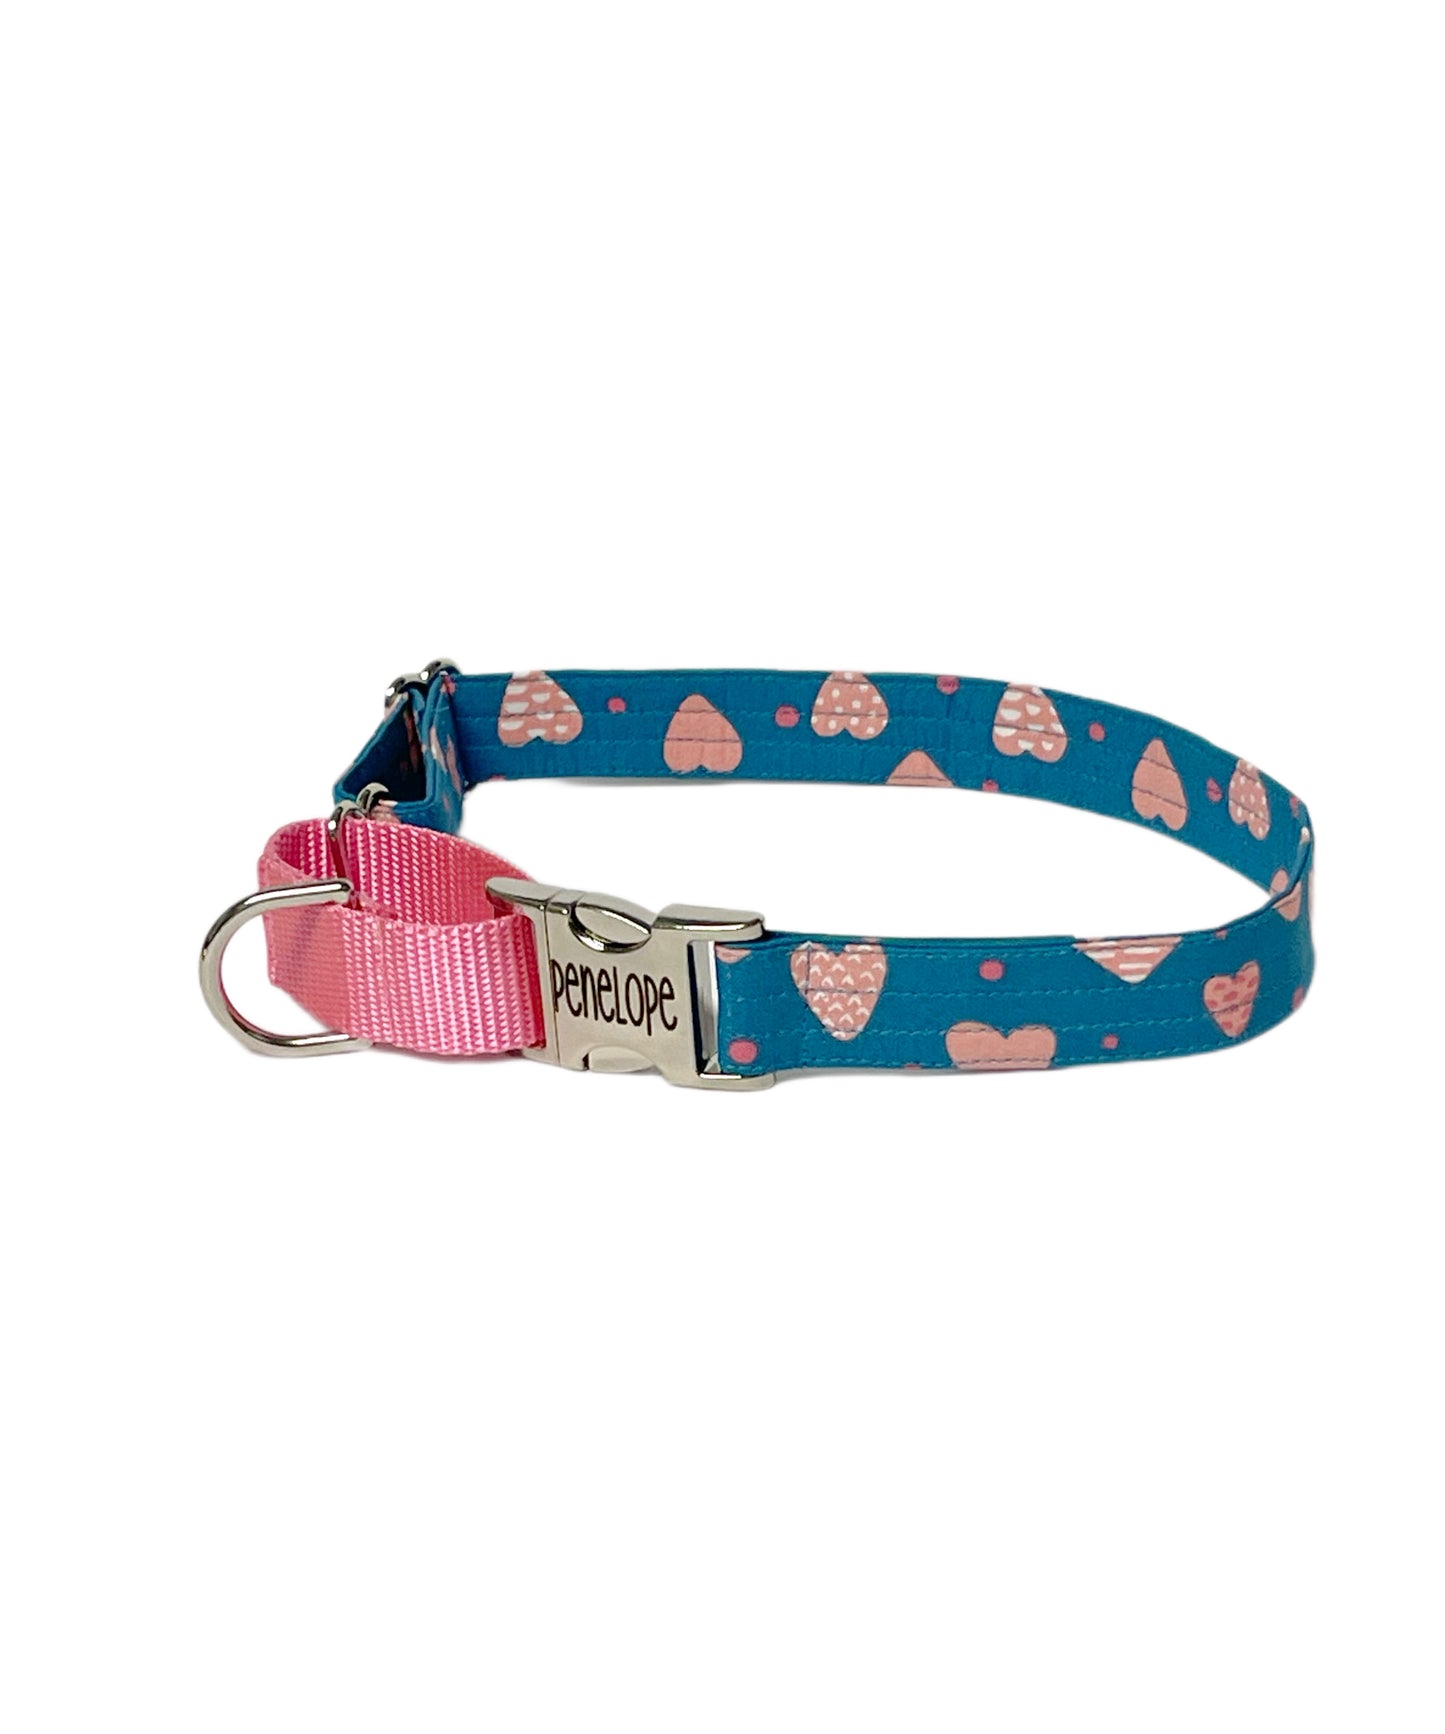 pink heart valentine martingale dog collar with personalized buckle